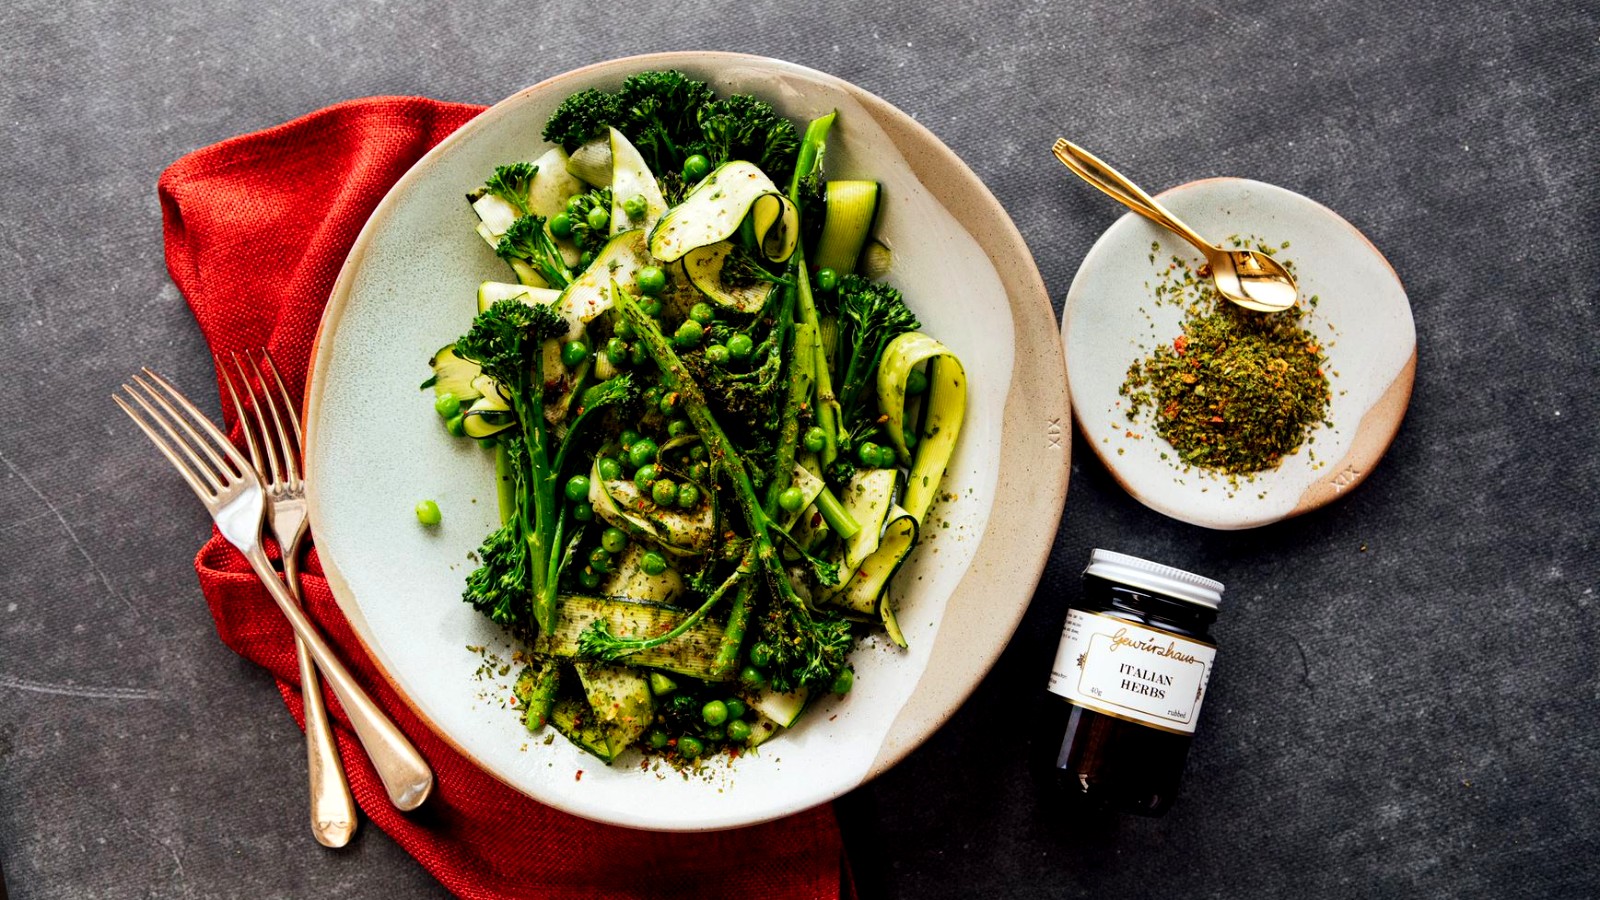 Image of Grilled Broccolini with Zucchini, Peas & Italian Herbs